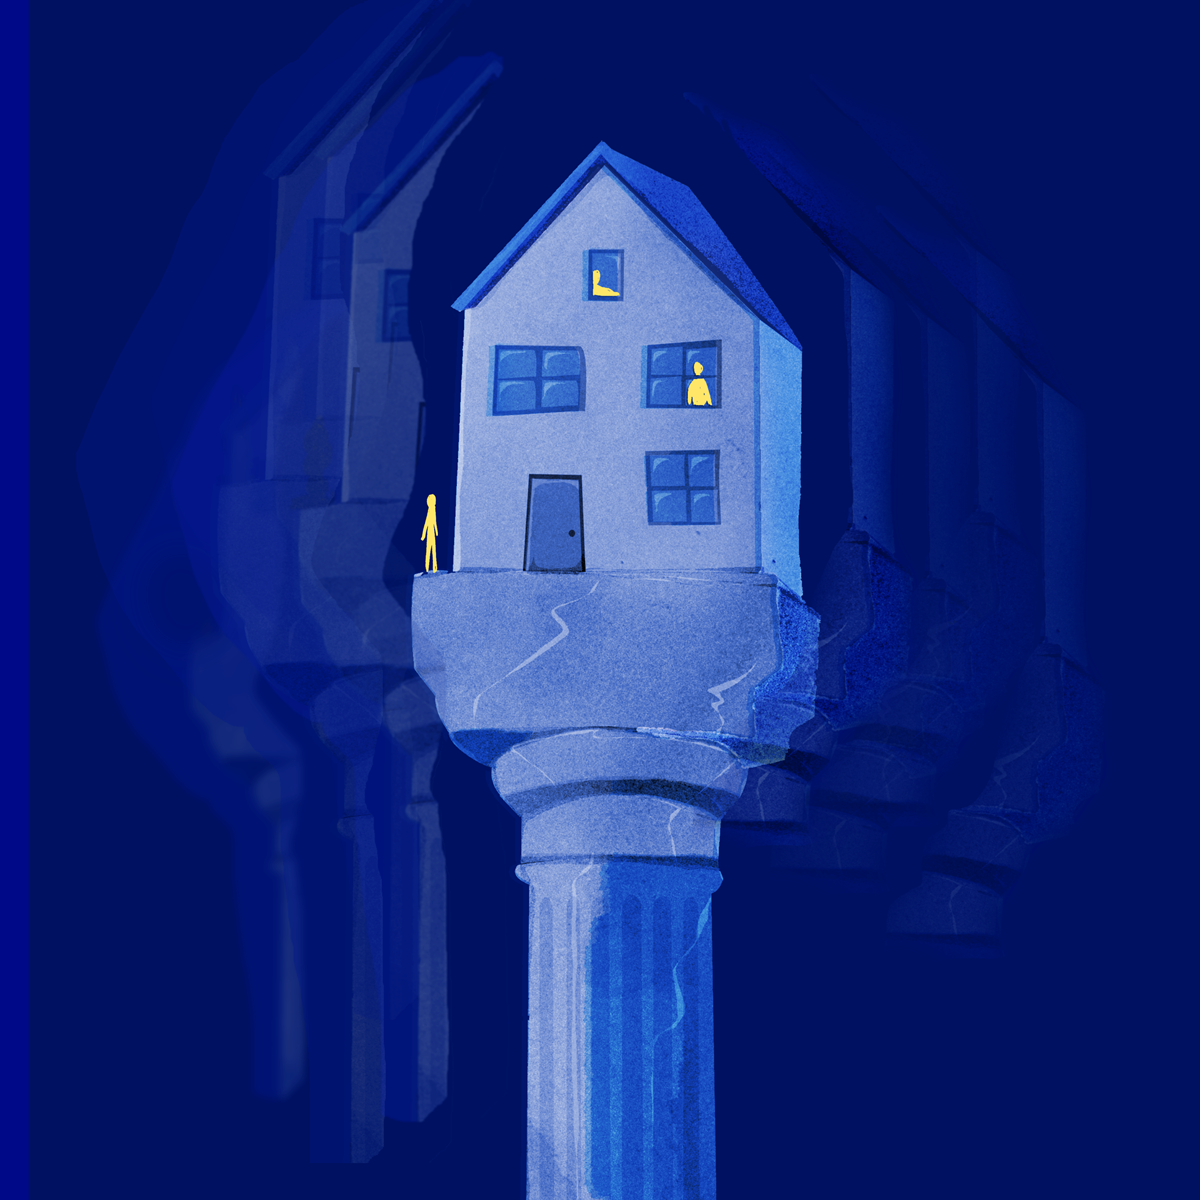 article thumb - The Blue House